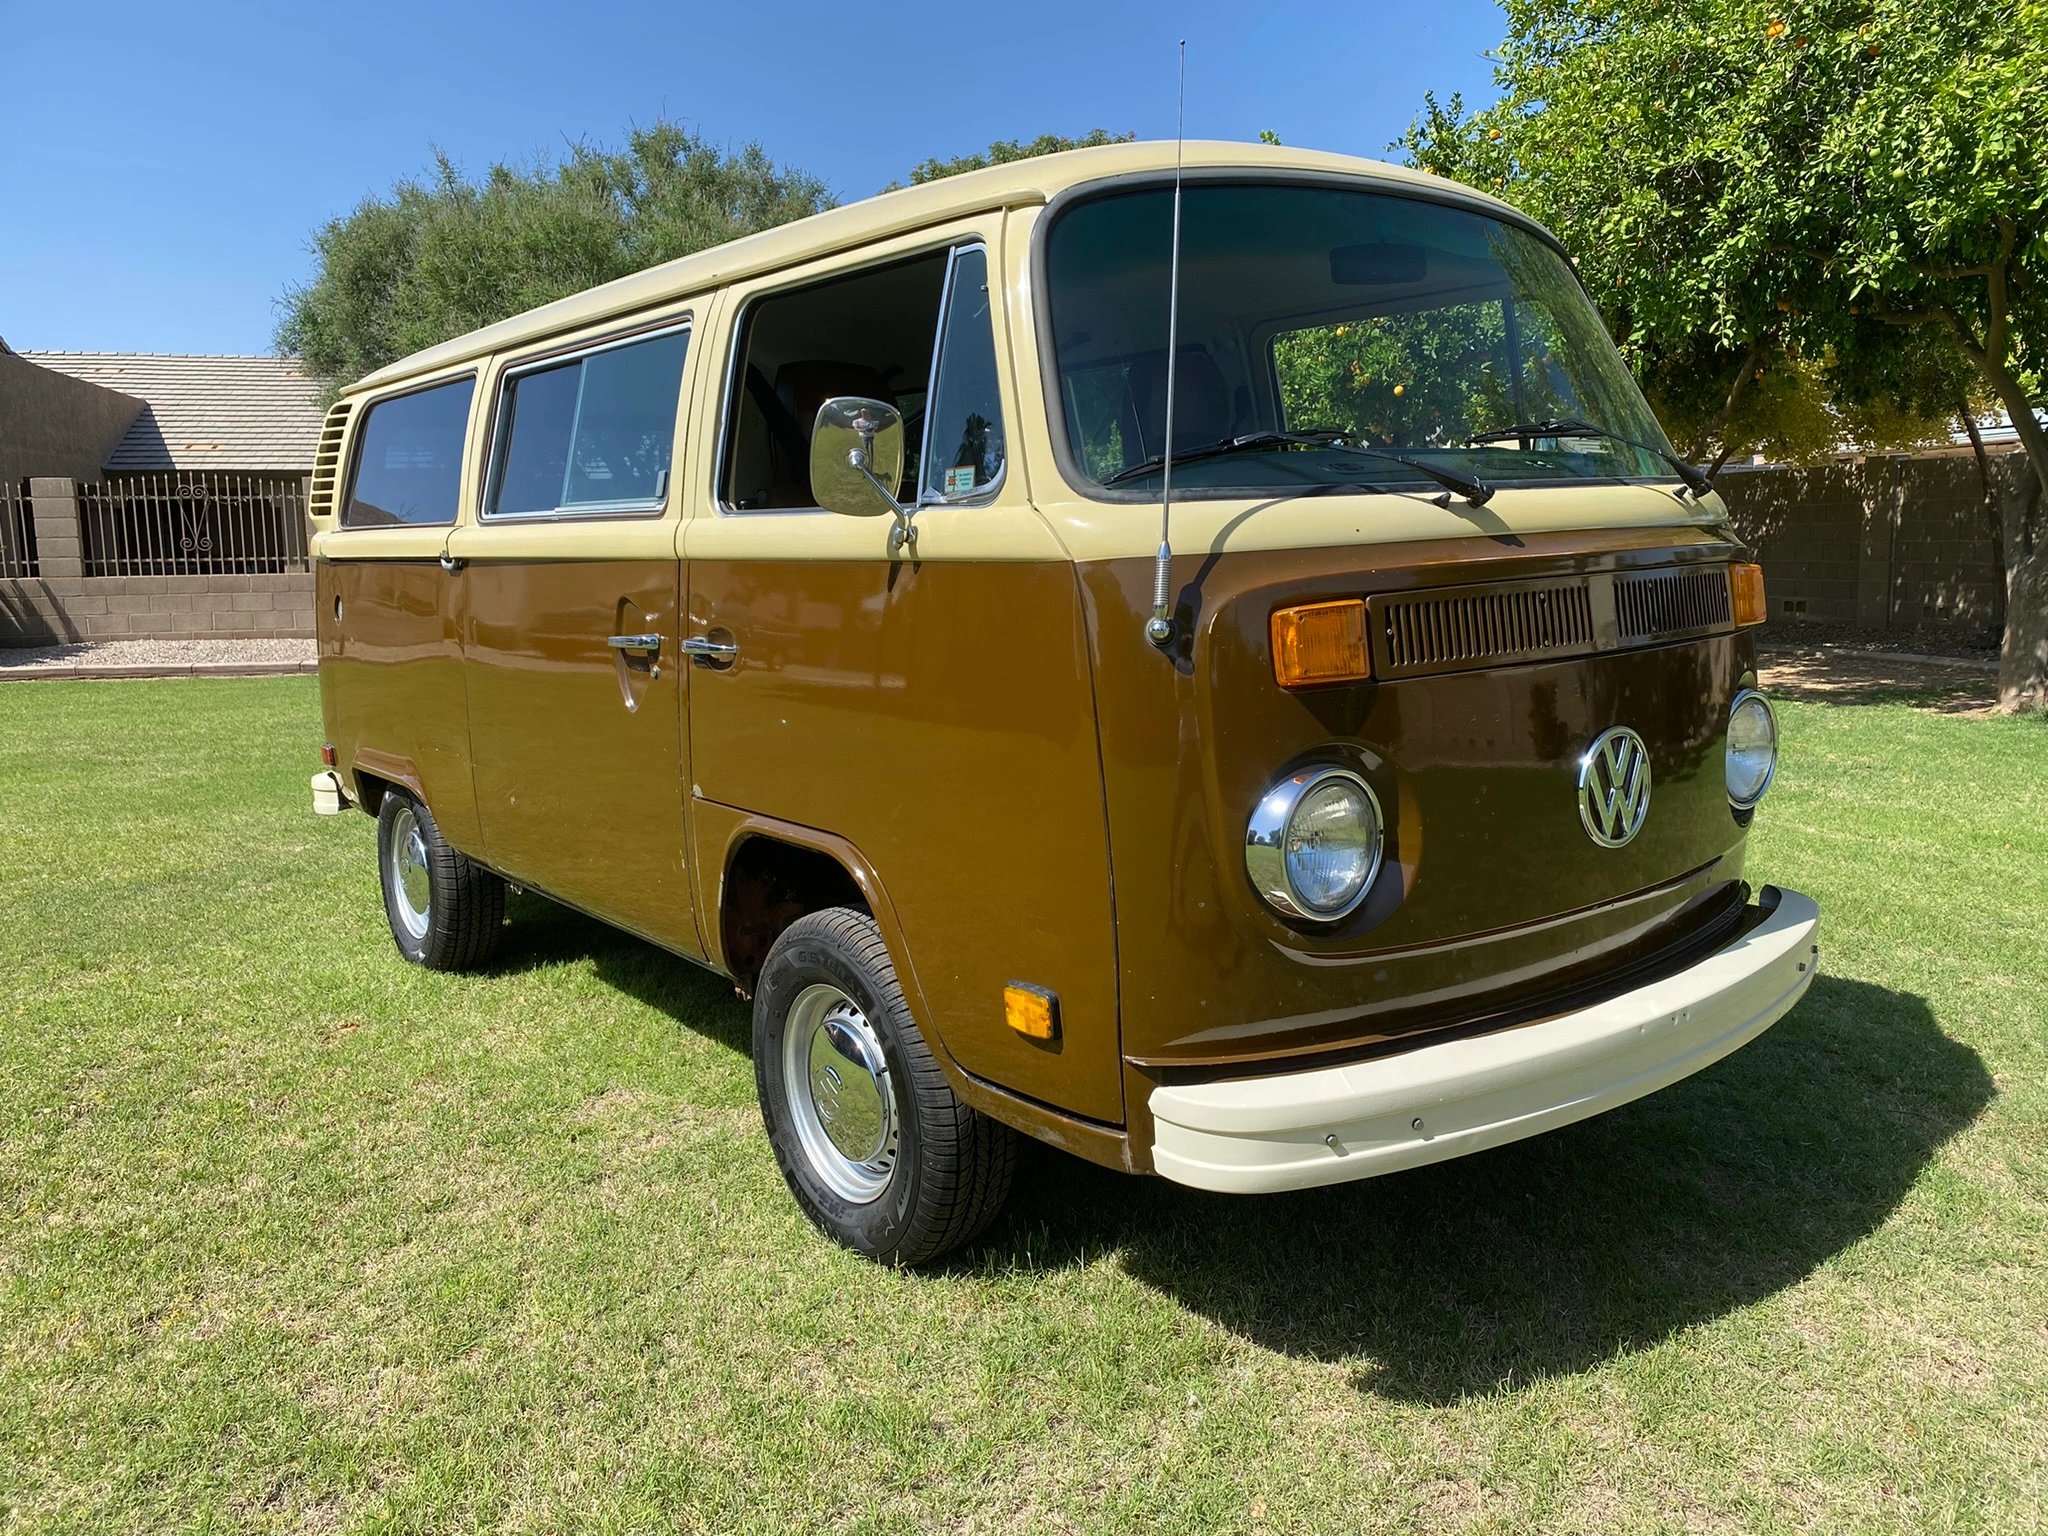 If You've Ever Wanted To Own a Volkswagen Type 2 Bus, the Love Bus